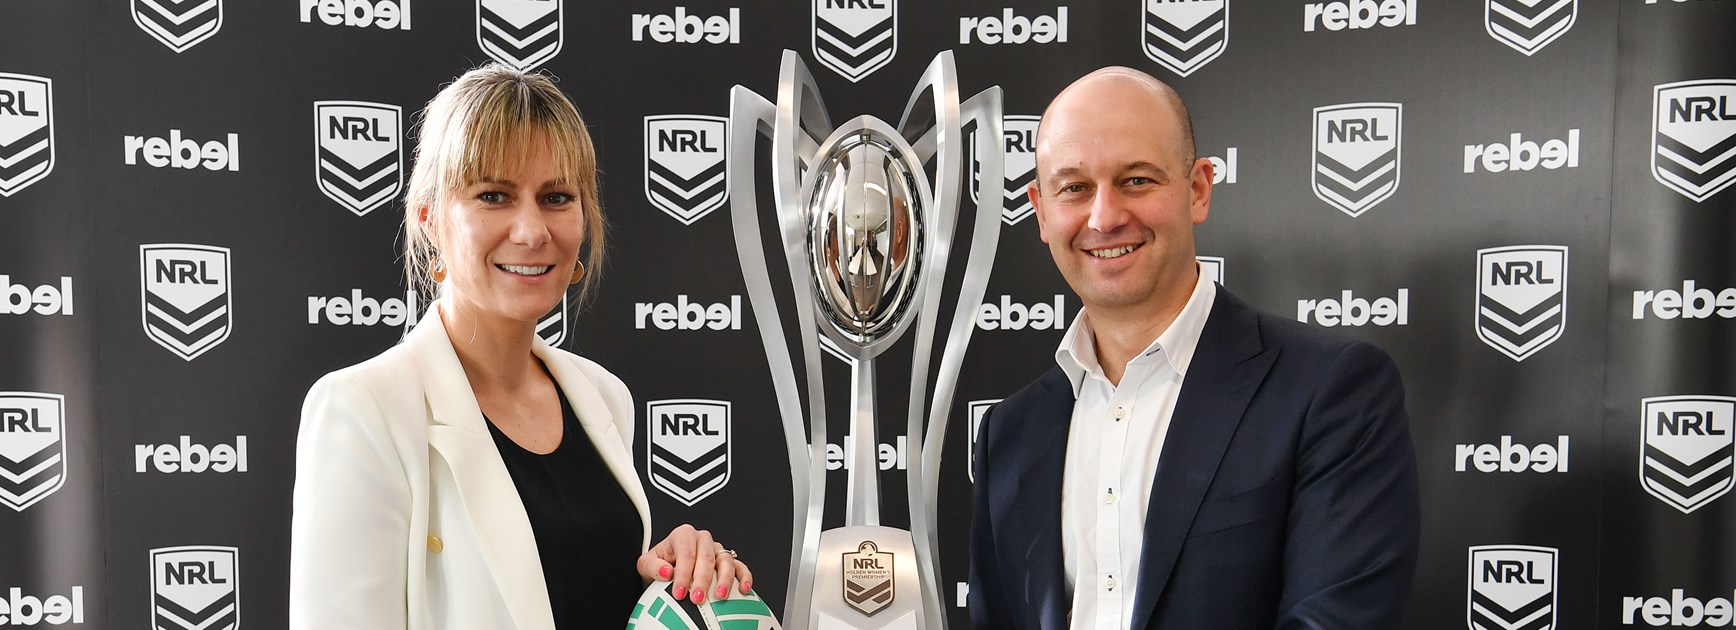 Rebel Managing Director Erica Berchtold with NRL CEO Todd Greenberg.